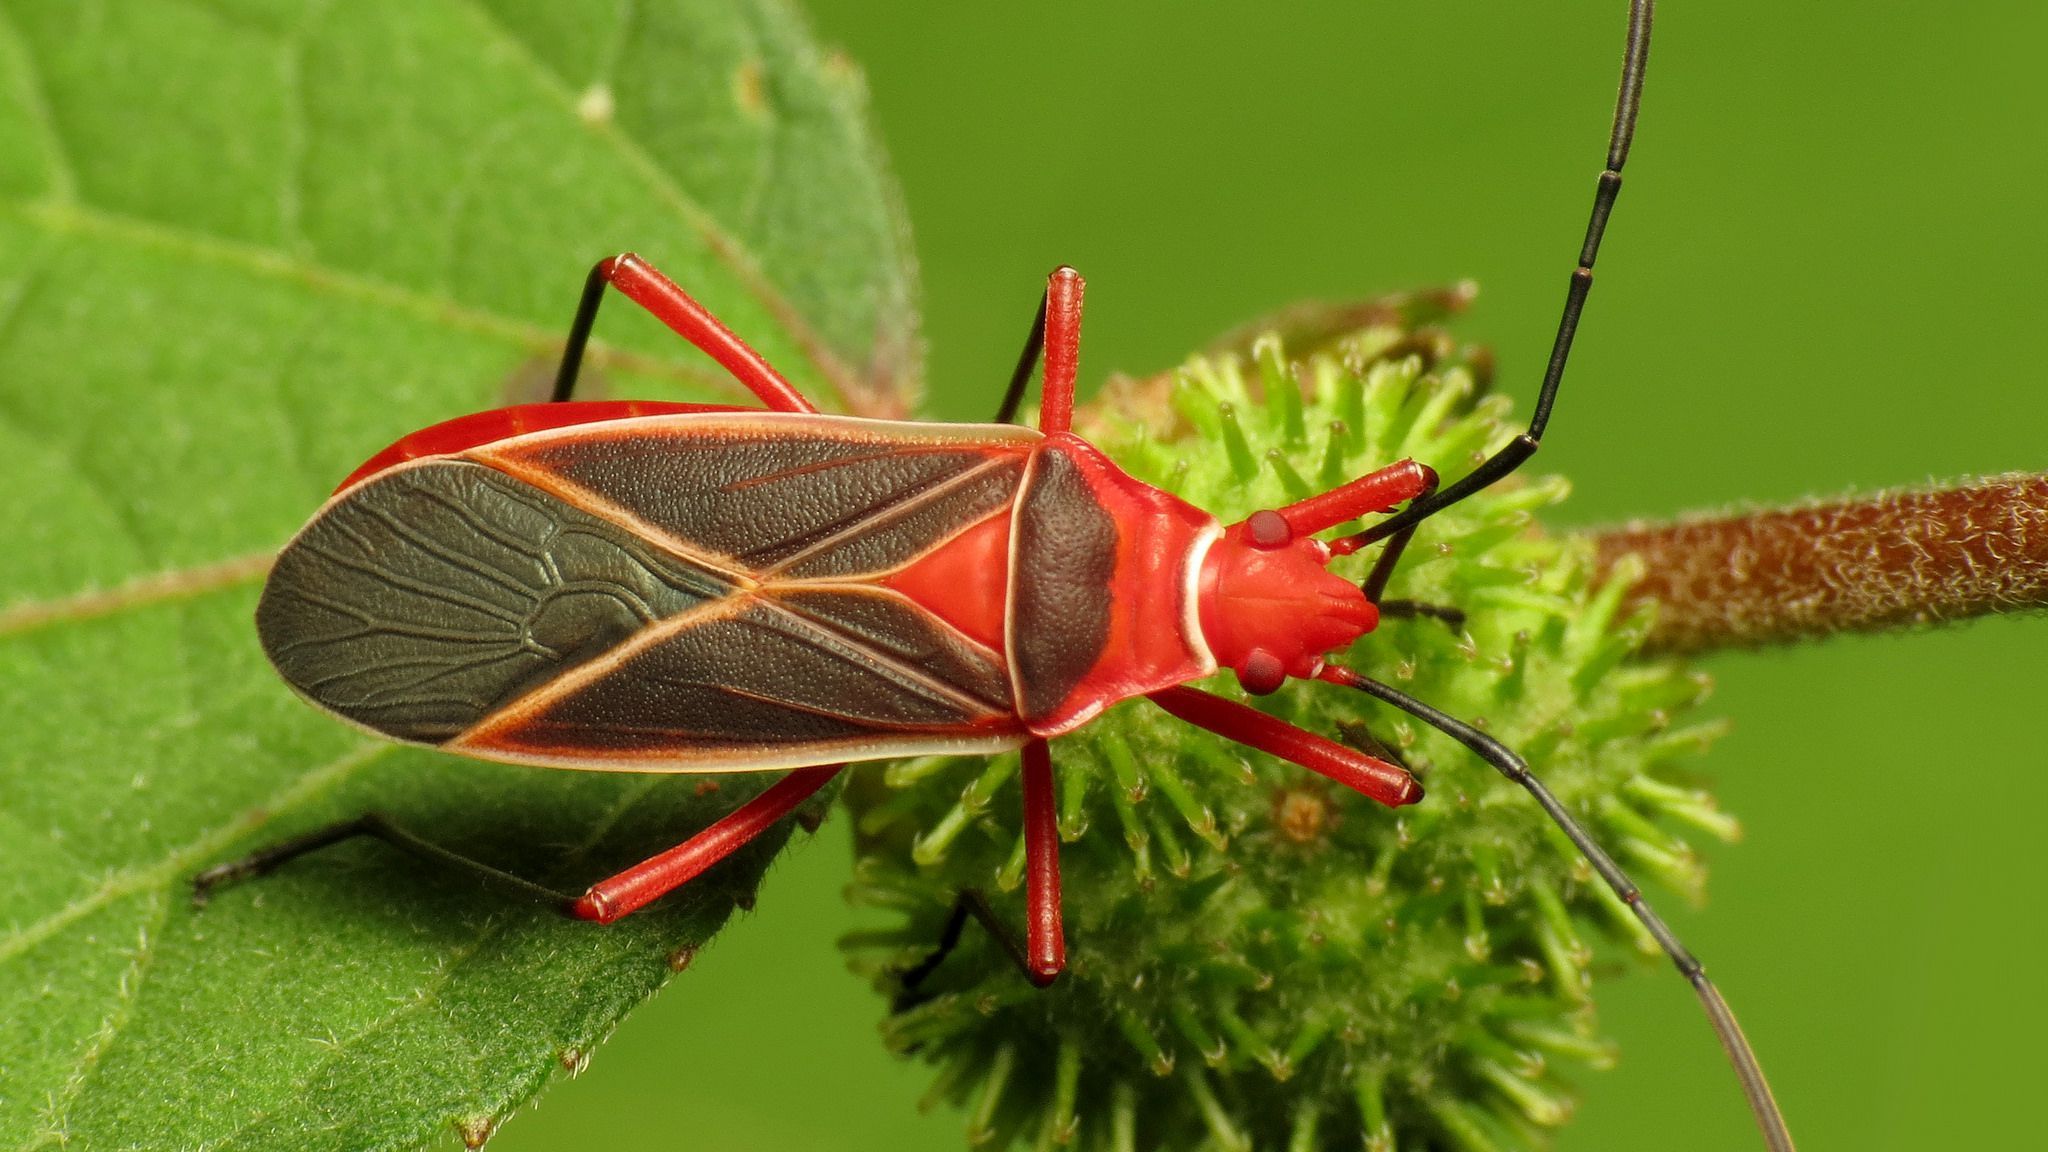 Stunning Red and Black Garden Bugs